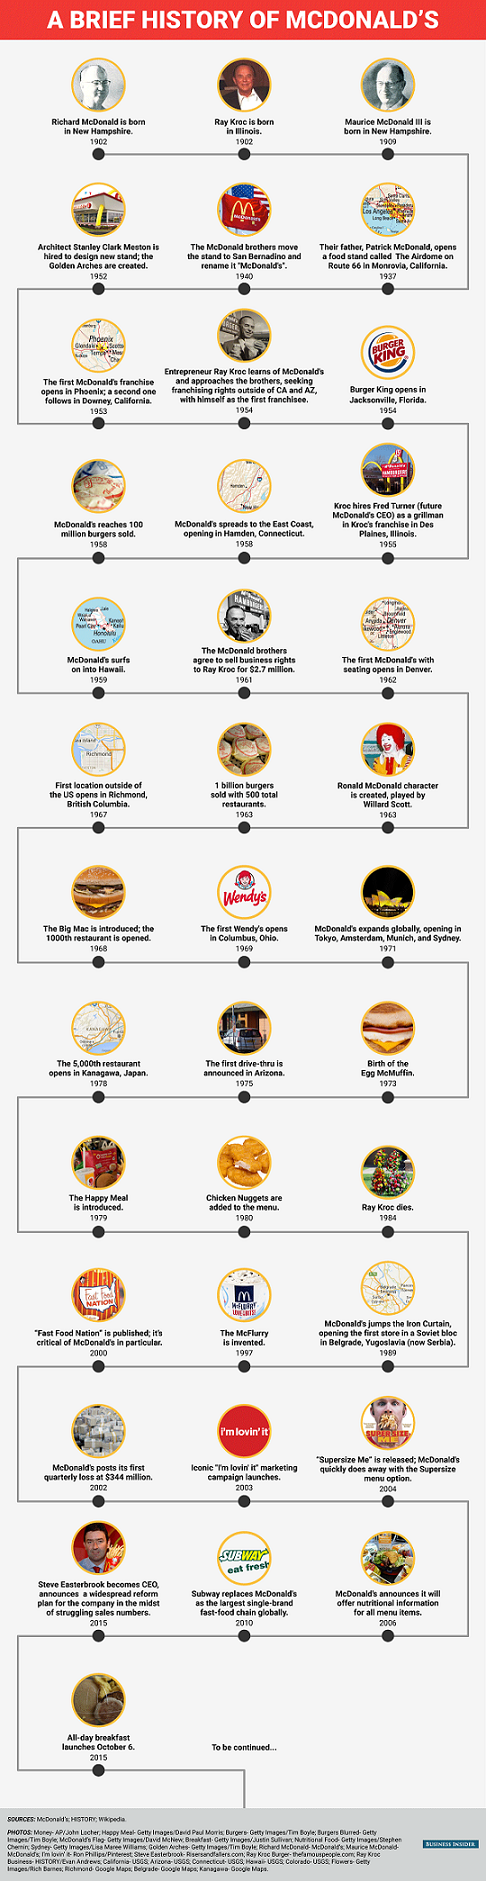 McDonald's Timeline in the US